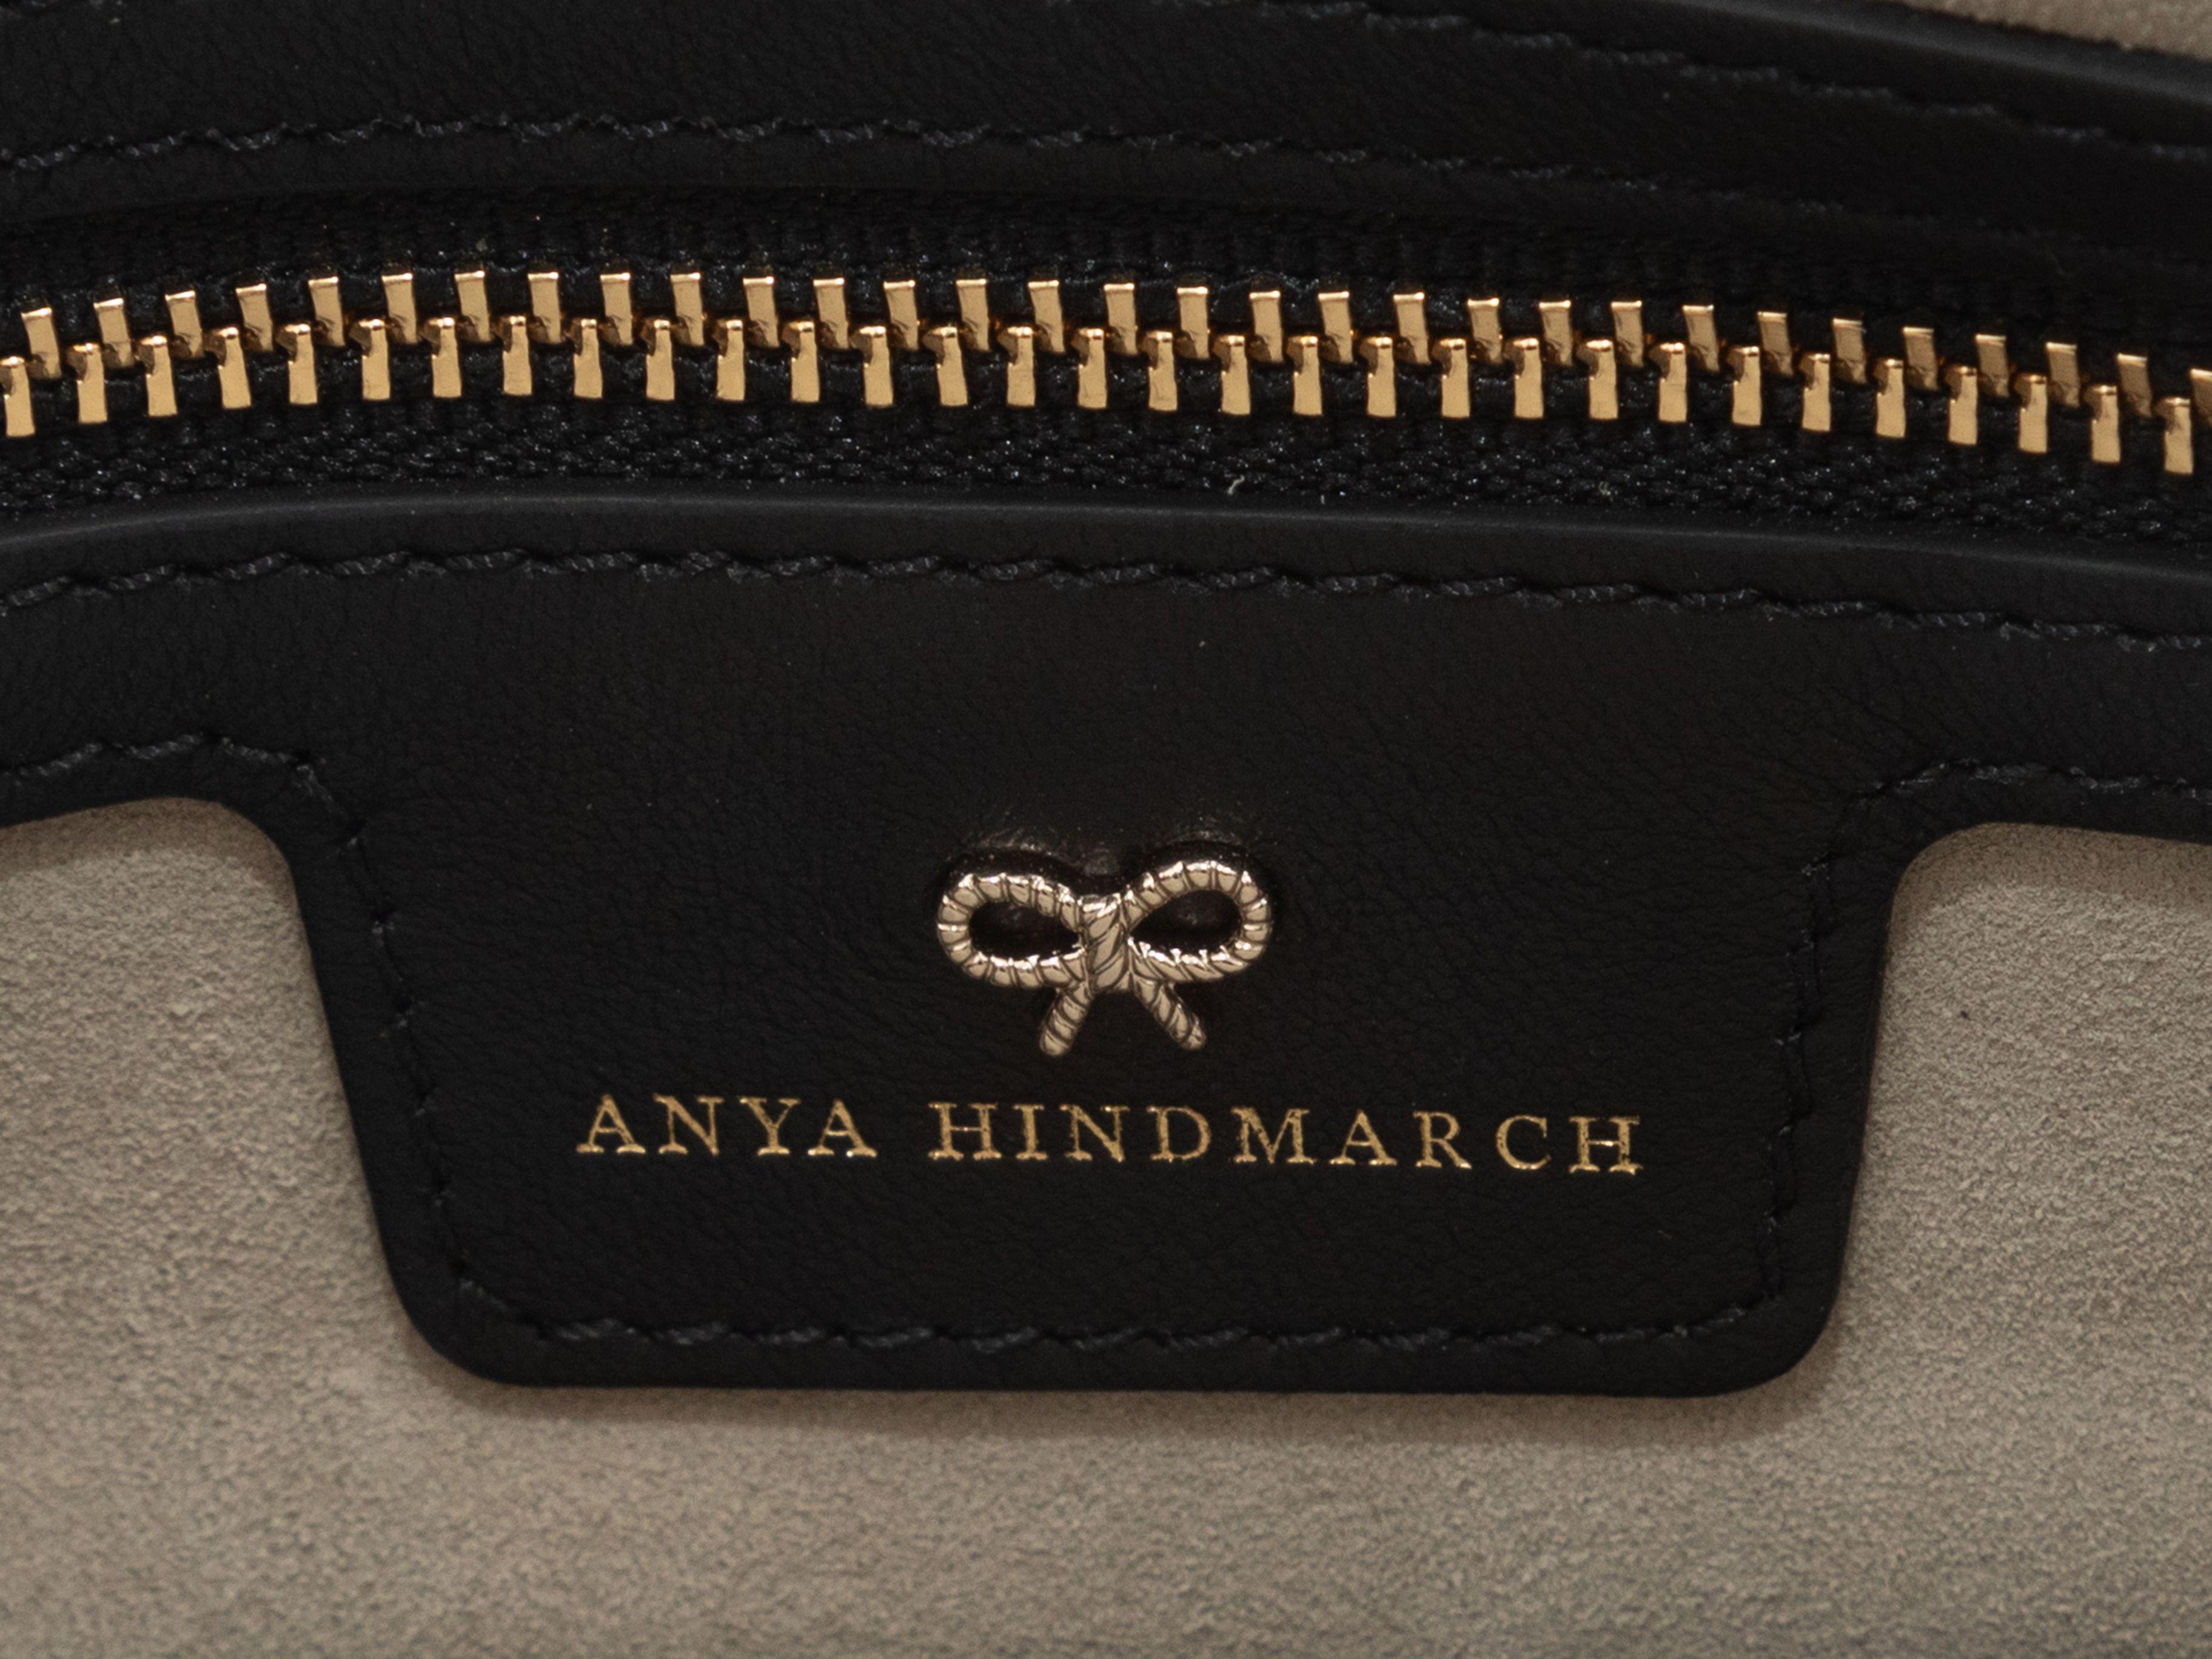 Product Details: Black & Multicolor Anya Hindmarch Allover Sticker Print Clutch. This clutch features an embossed leather body, gold-tone hardware, interior zip pocket, interior card slots, and a tassel-accented zip closure at the top. 11